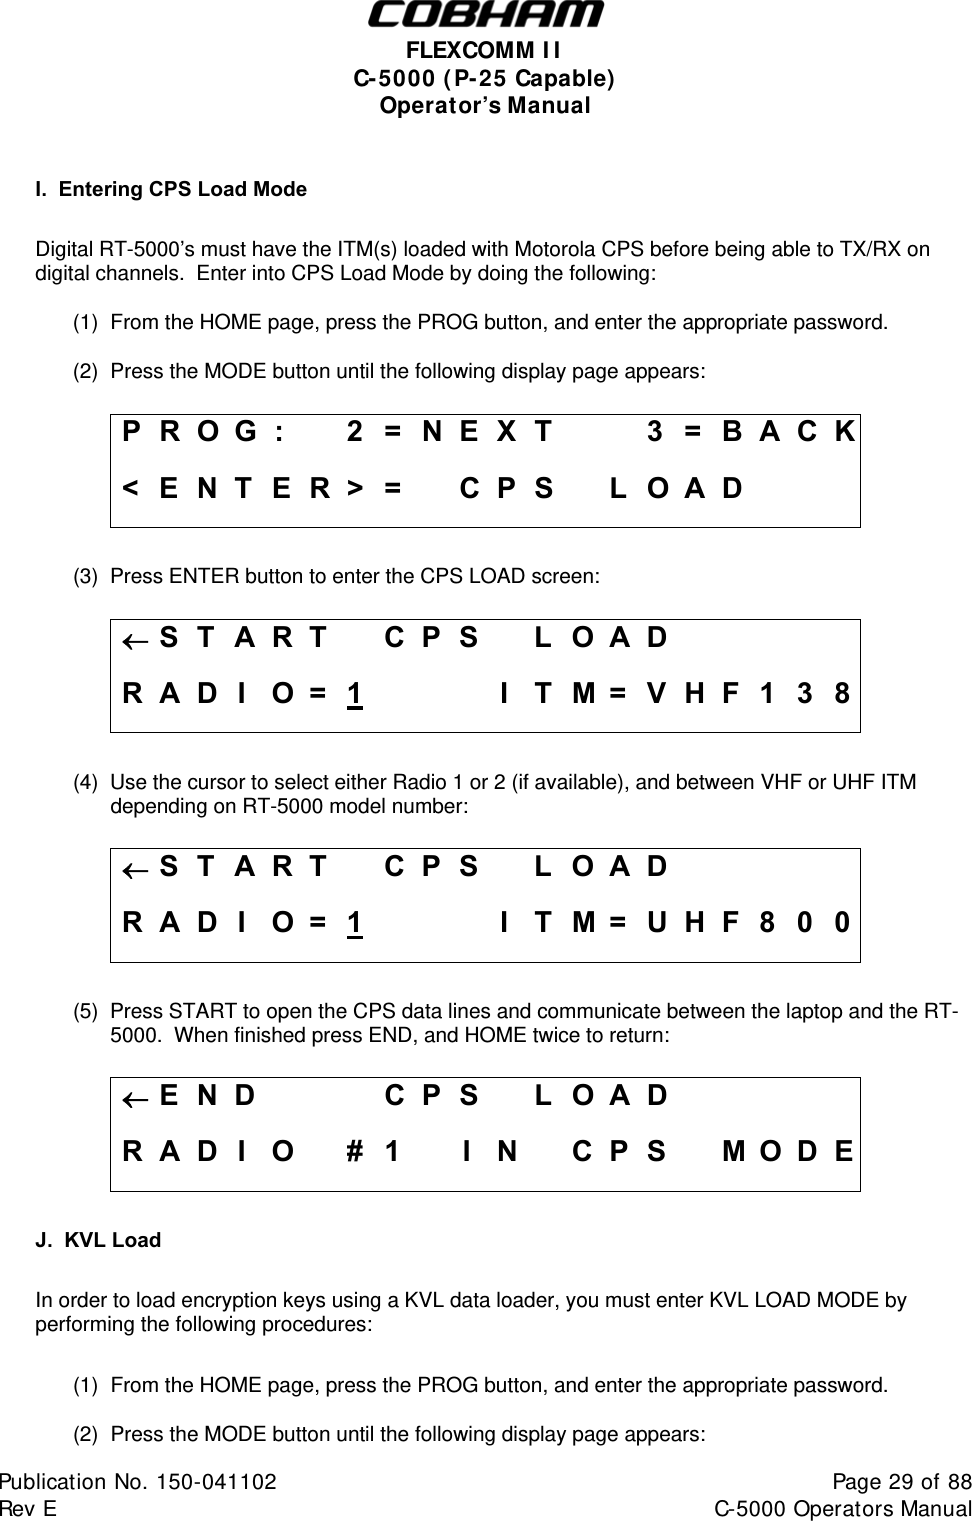  FLEXCOMM II C-5000 (P-25 Capable) Operator’s Manual  I.  Entering CPS Load Mode  Digital RT-5000’s must have the ITM(s) loaded with Motorola CPS before being able to TX/RX on digital channels.  Enter into CPS Load Mode by doing the following: (1)  From the HOME page, press the PROG button, and enter the appropriate password. (2)  Press the MODE button until the following display page appears:  P R O G :    2 = N E X T     3 = B A C K &lt; E N T E R &gt; =   C P S   L O A D        (3)  Press ENTER button to enter the CPS LOAD screen:  S T A R T  C P S  L O A D      R A D I  O =  1    I T M = V H F 1 3 8  (4)  Use the cursor to select either Radio 1 or 2 (if available), and between VHF or UHF ITM             depending on RT-5000 model number:  S T A R T  C P S  L O A D      R A D I  O =  1    I T M = U H F 8 0 0  (5)  Press START to open the CPS data lines and communicate between the laptop and the RT-5000.  When finished press END, and HOME twice to return:  E N D    CPS LOAD     R A D I O  # 1  I N  C P S  M O D E  J.  KVL Load  In order to load encryption keys using a KVL data loader, you must enter KVL LOAD MODE by performing the following procedures:  (1)  From the HOME page, press the PROG button, and enter the appropriate password. (2)  Press the MODE button until the following display page appears: Publication No. 150-041102  Page 29 of 88  Rev E  C-5000 Operators Manual    